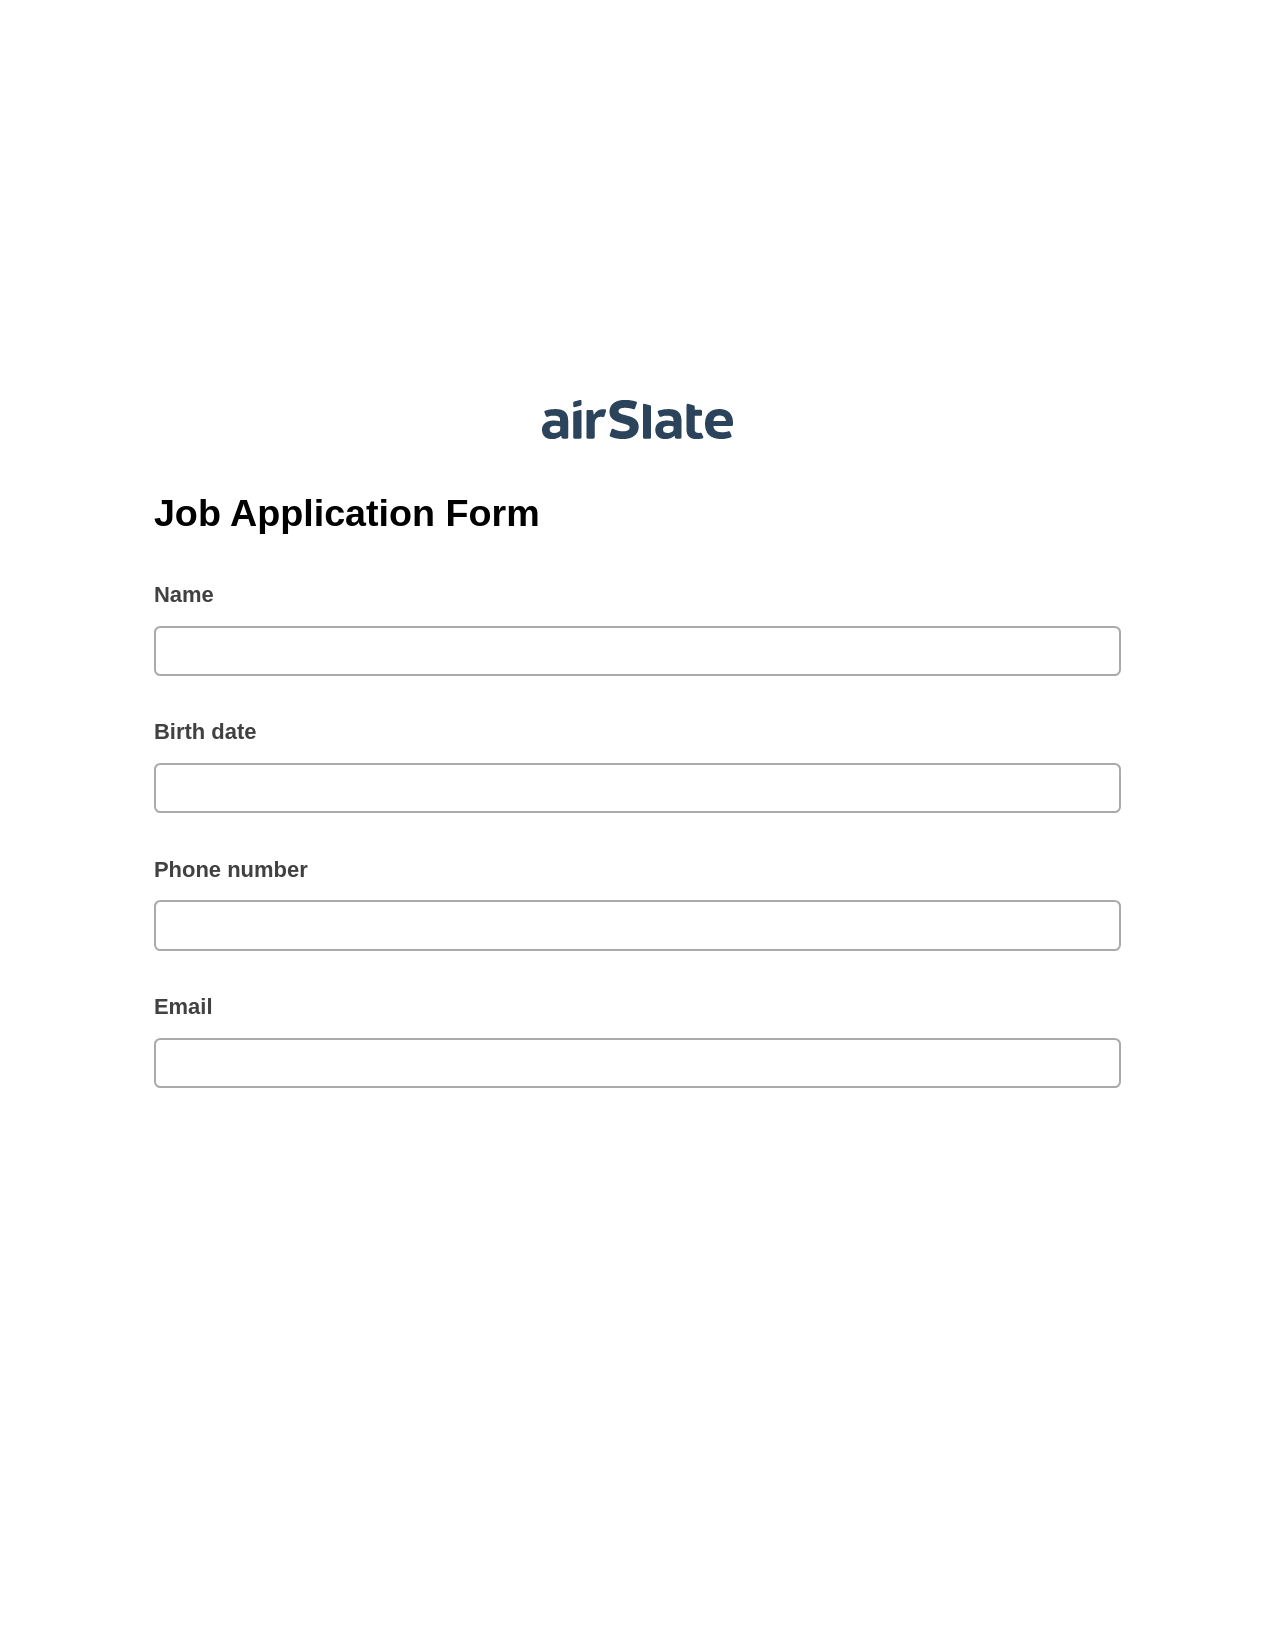 Job Application Form Pre-fill from Excel Spreadsheet Bot, Assign Roles to Recipients Bot, Export to Google Sheet Bot